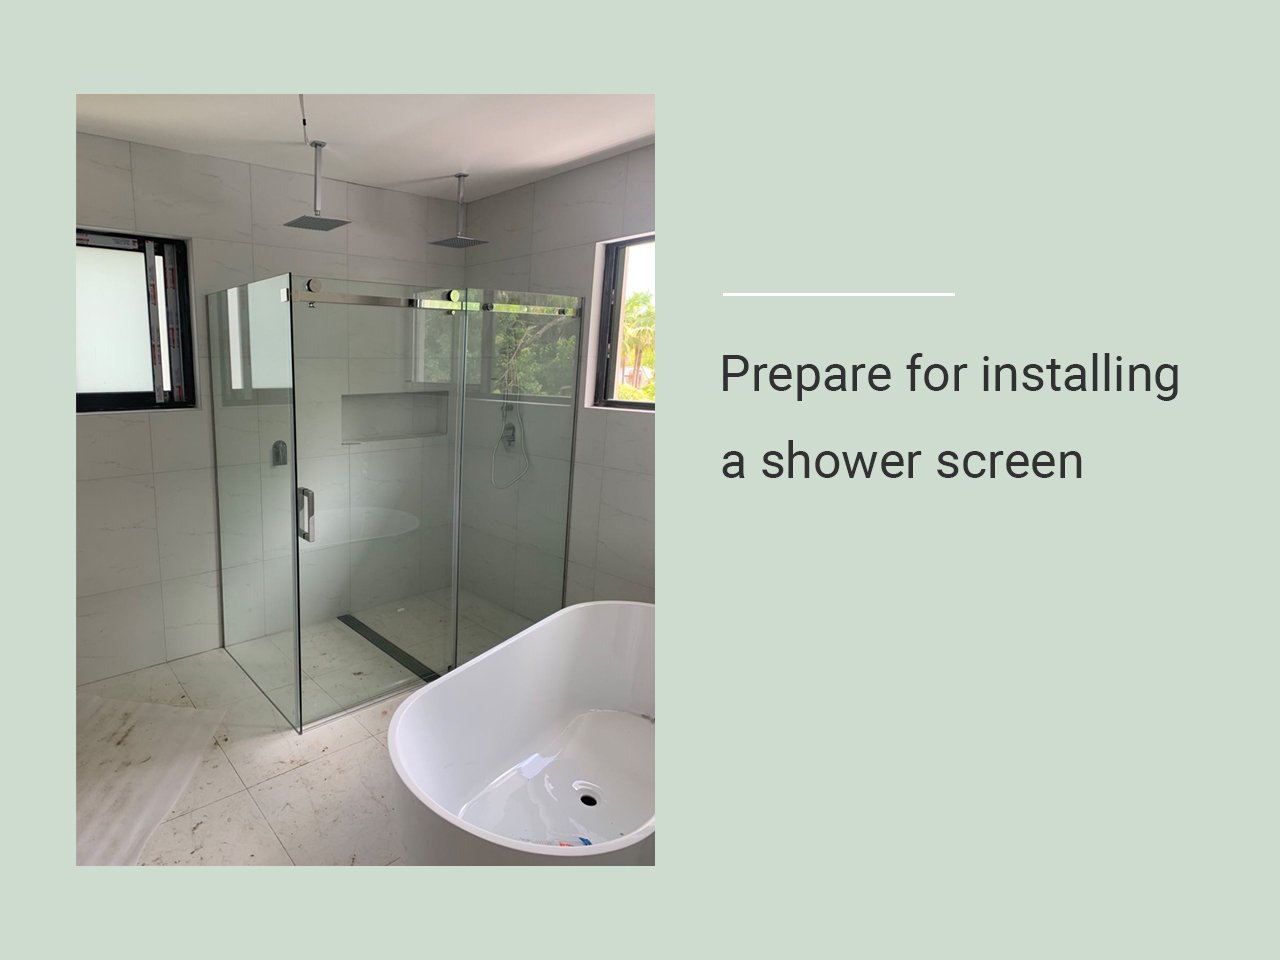 Some Important Things Before Installing a Shower Screen